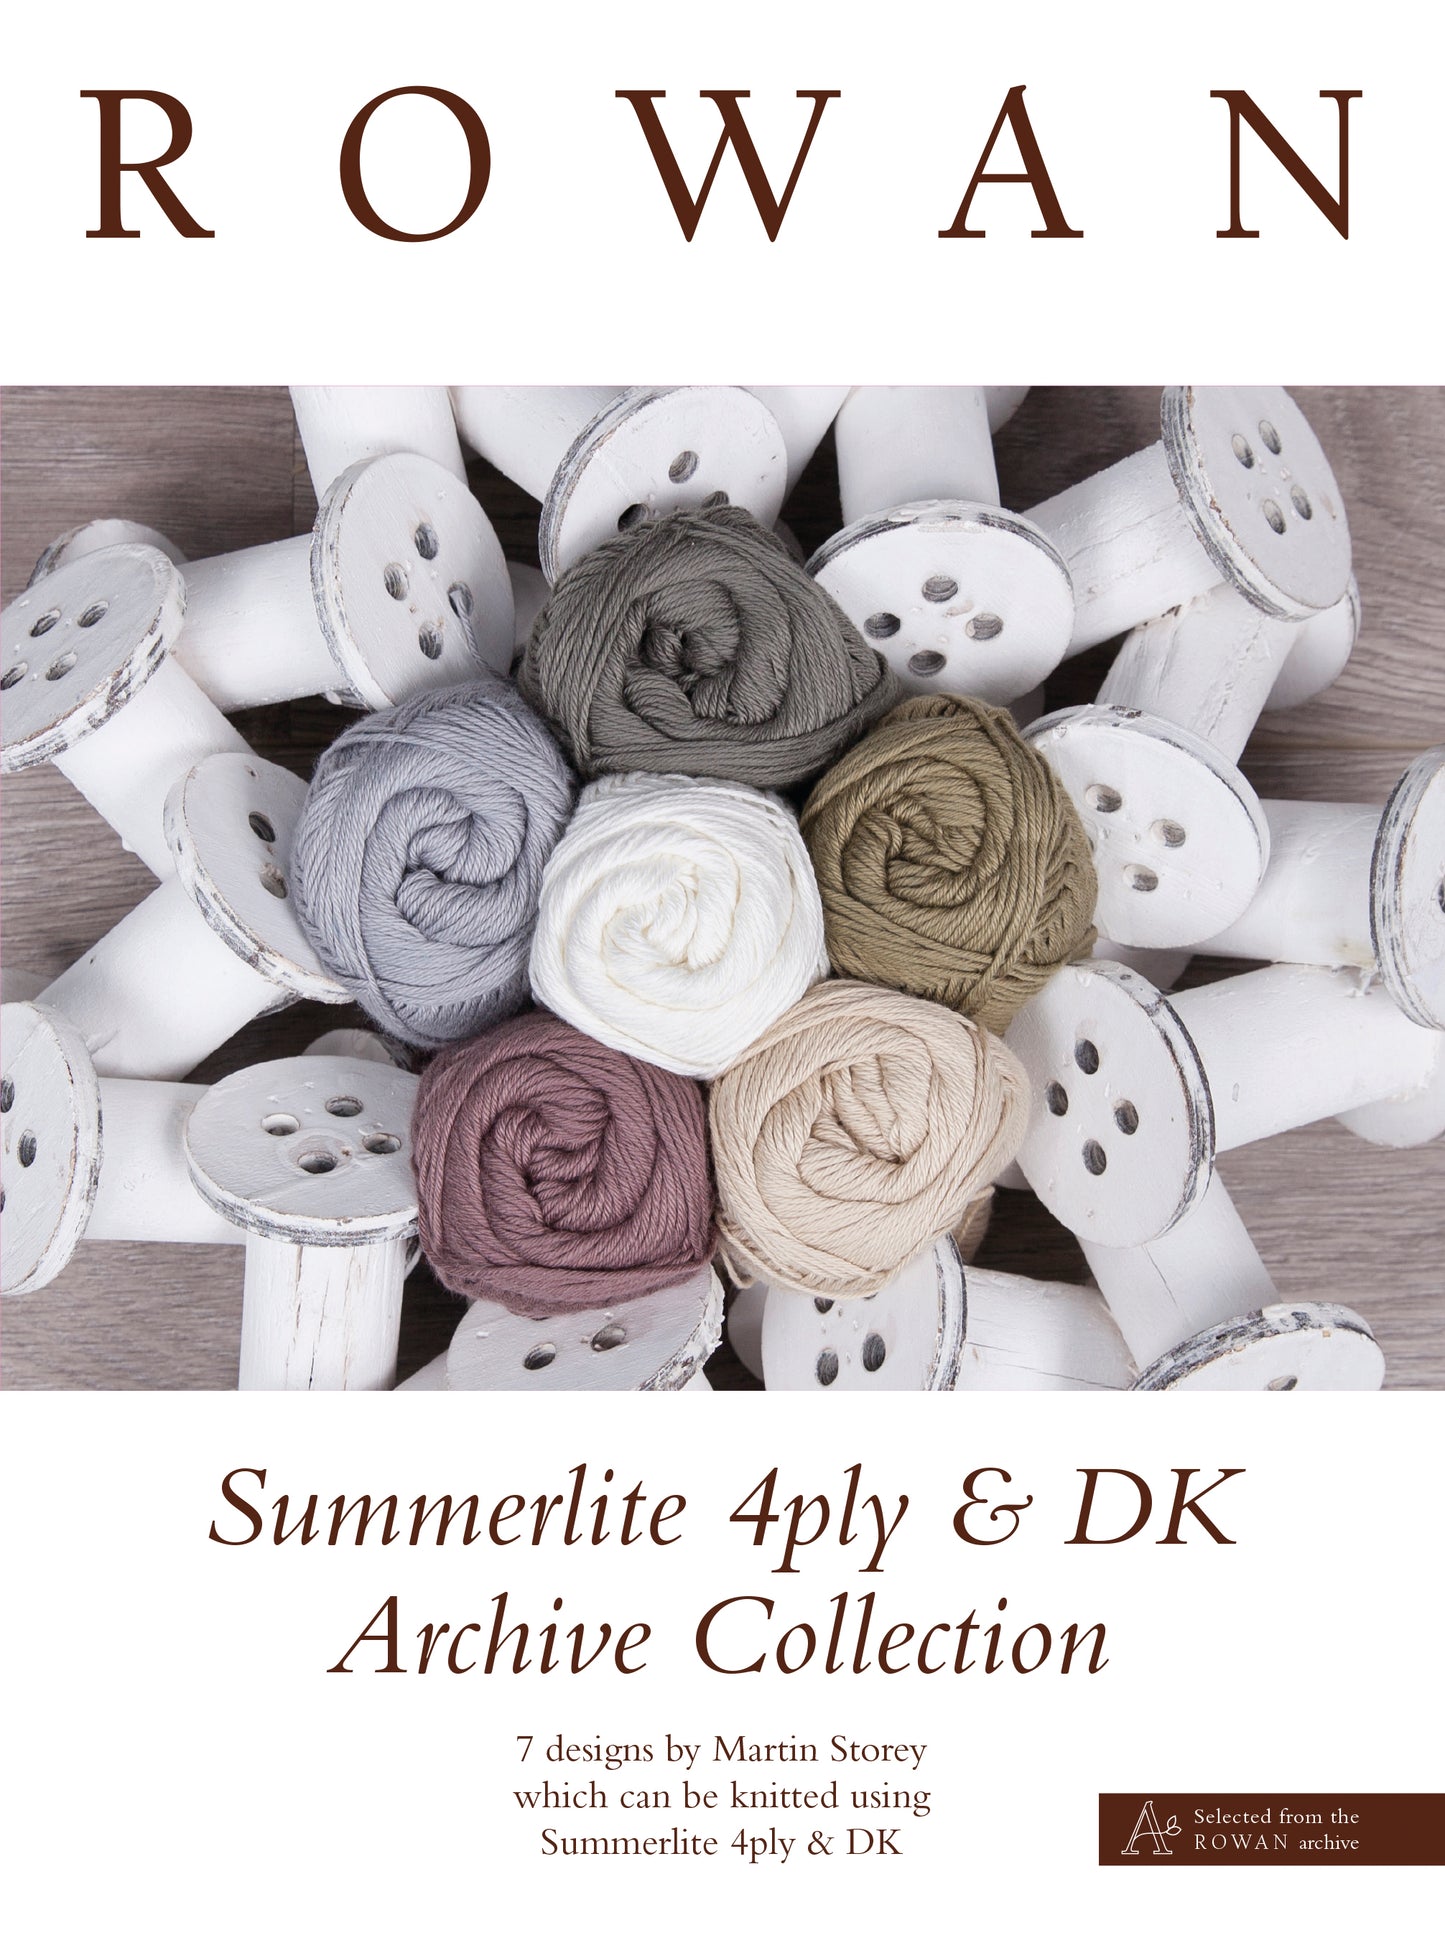 Rowan Summerlite 4ply & DK Archive Collection